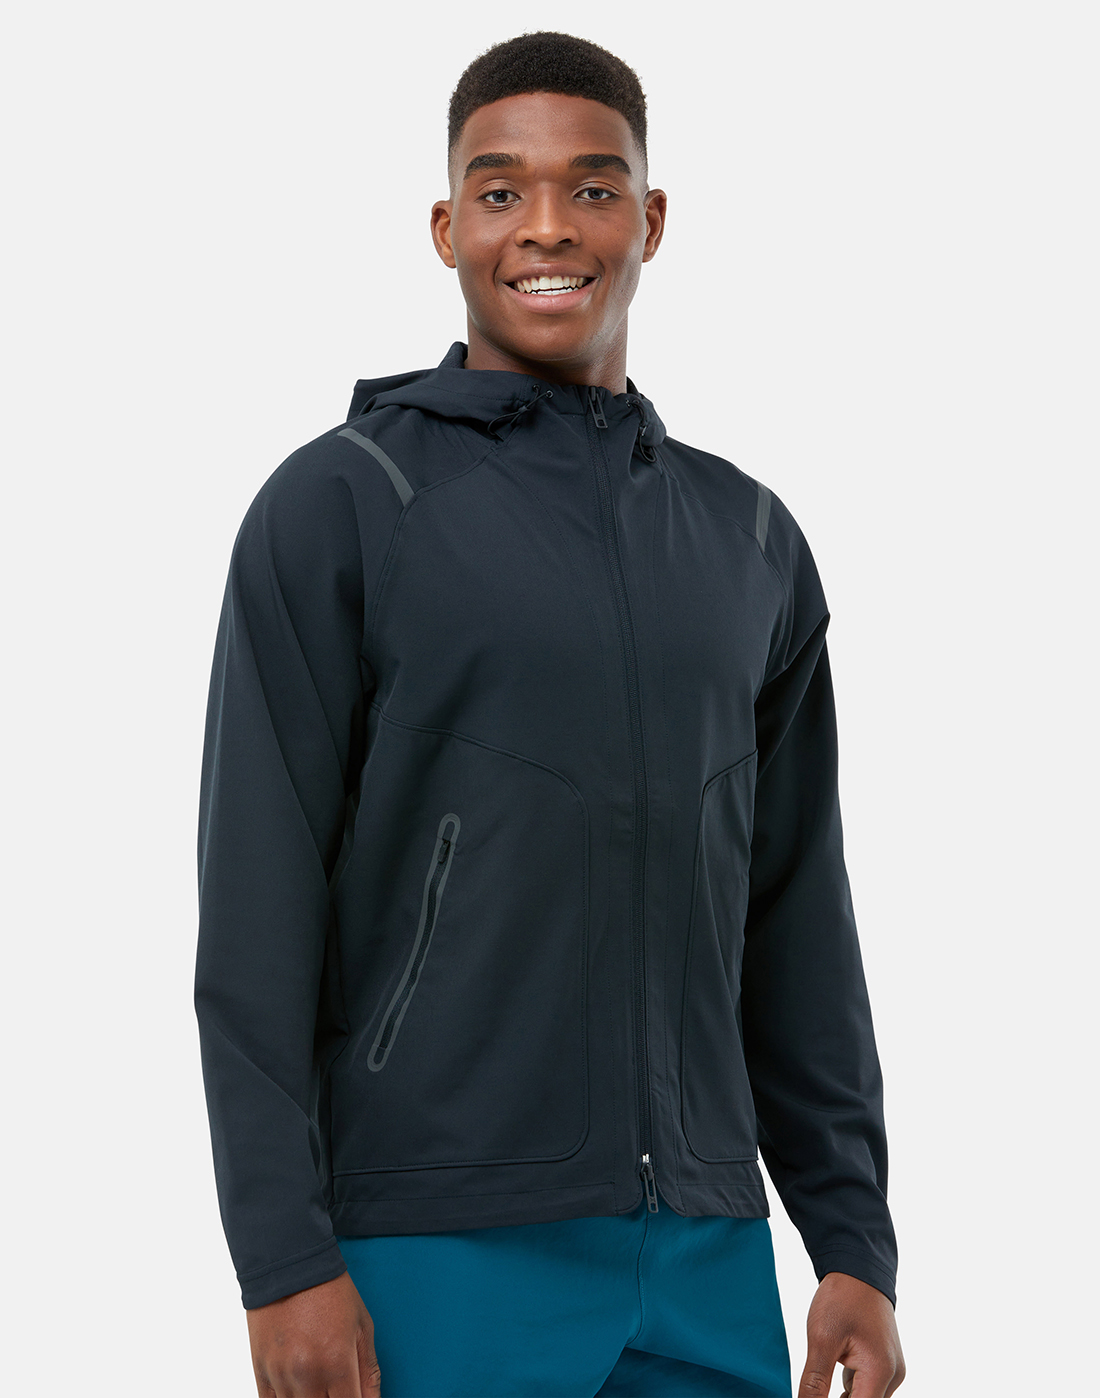 Under Armour Mens Unstoppable Jacket - Black | Life Style Sports EU